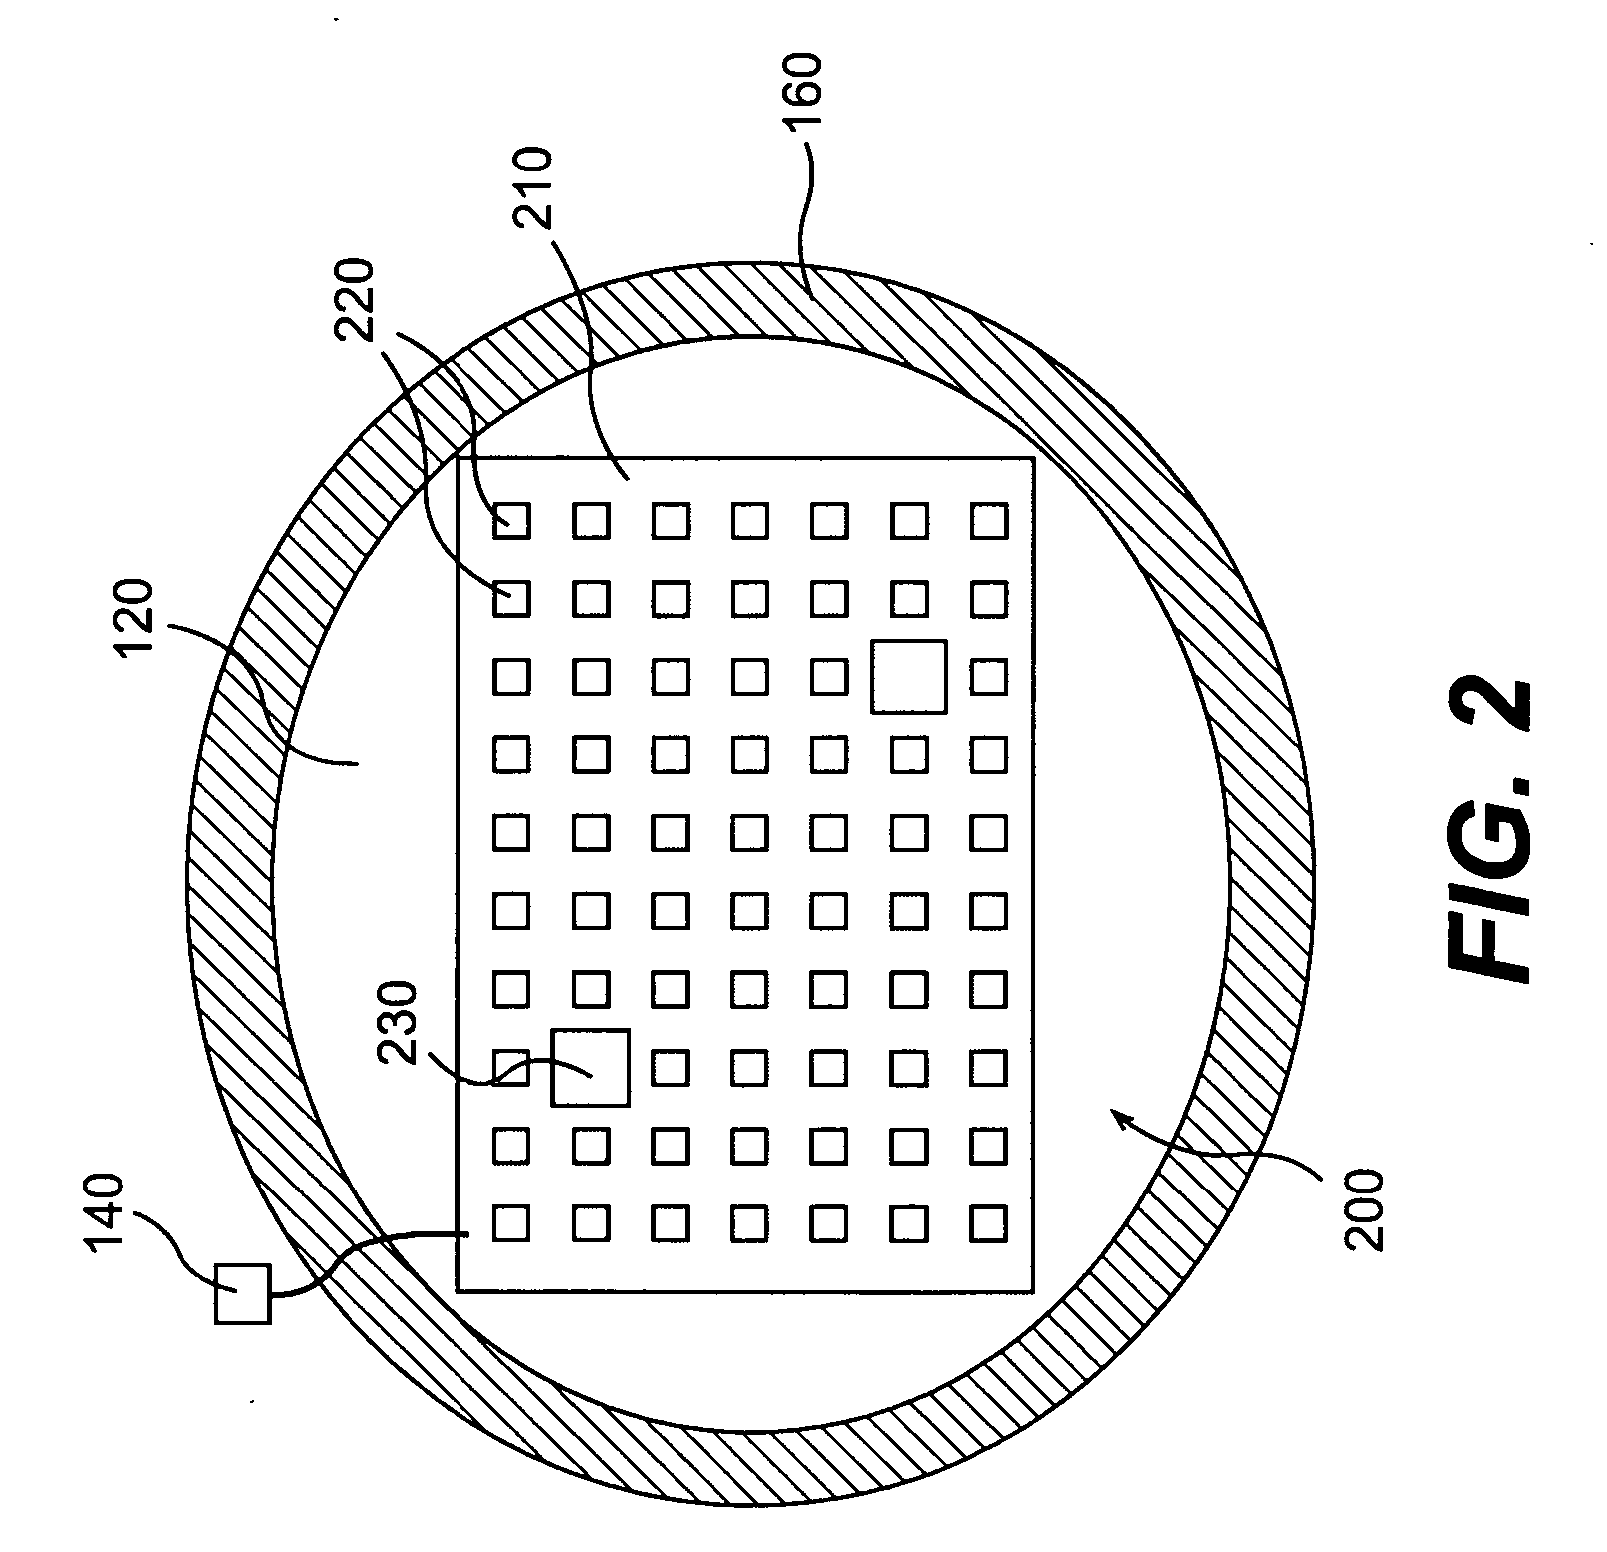 Neurological event monitoring and therapy systems and related methods